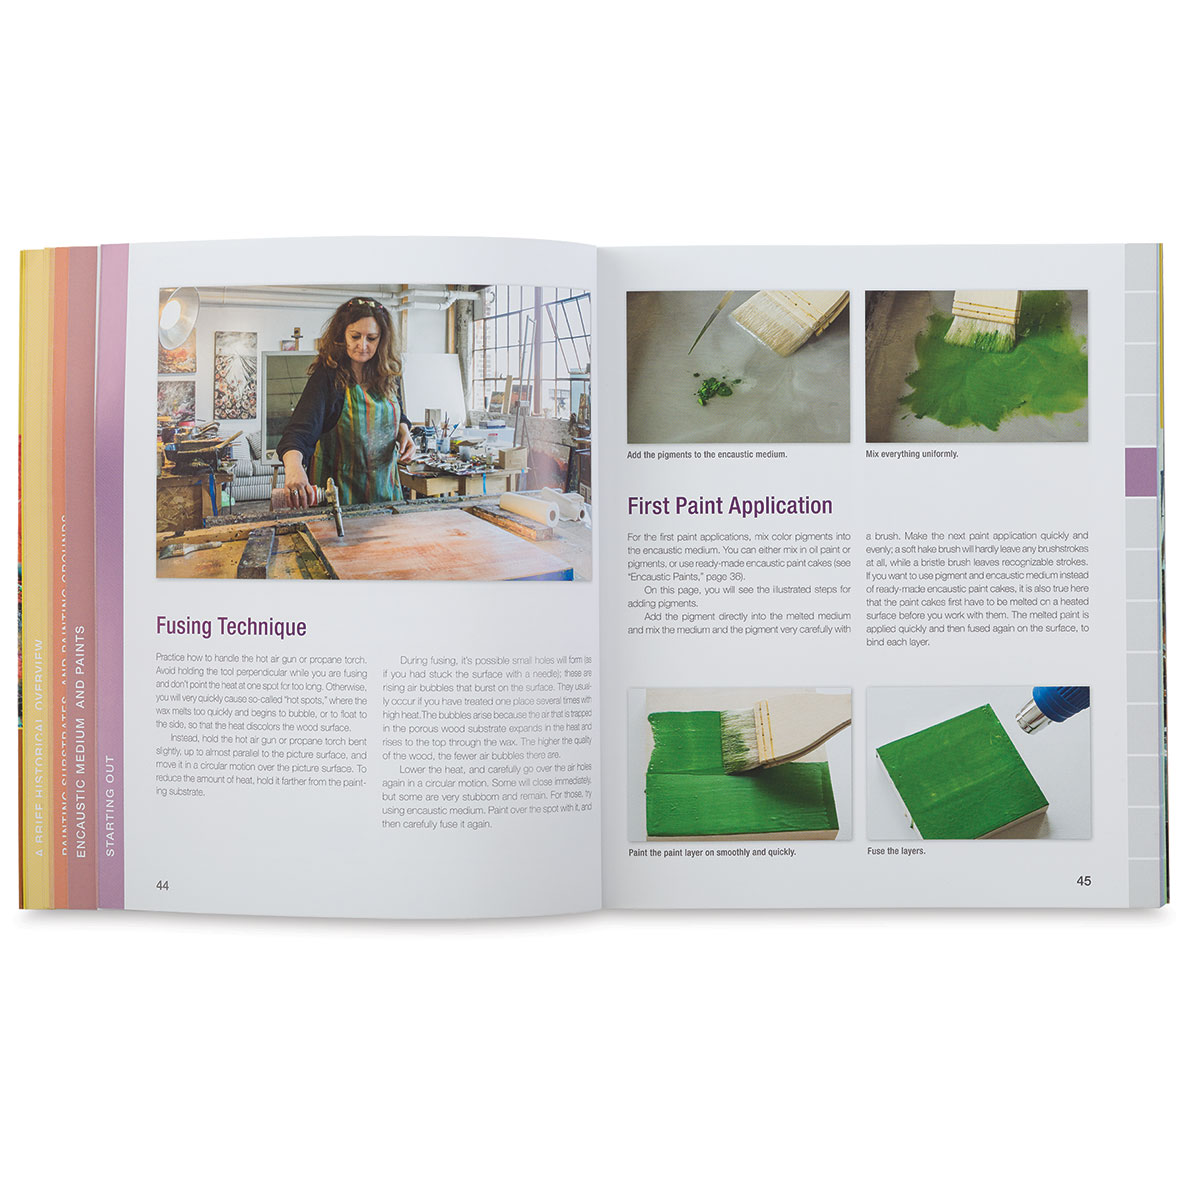 How to Create Encaustic Art: A Guide to Painting with Wax [Book]